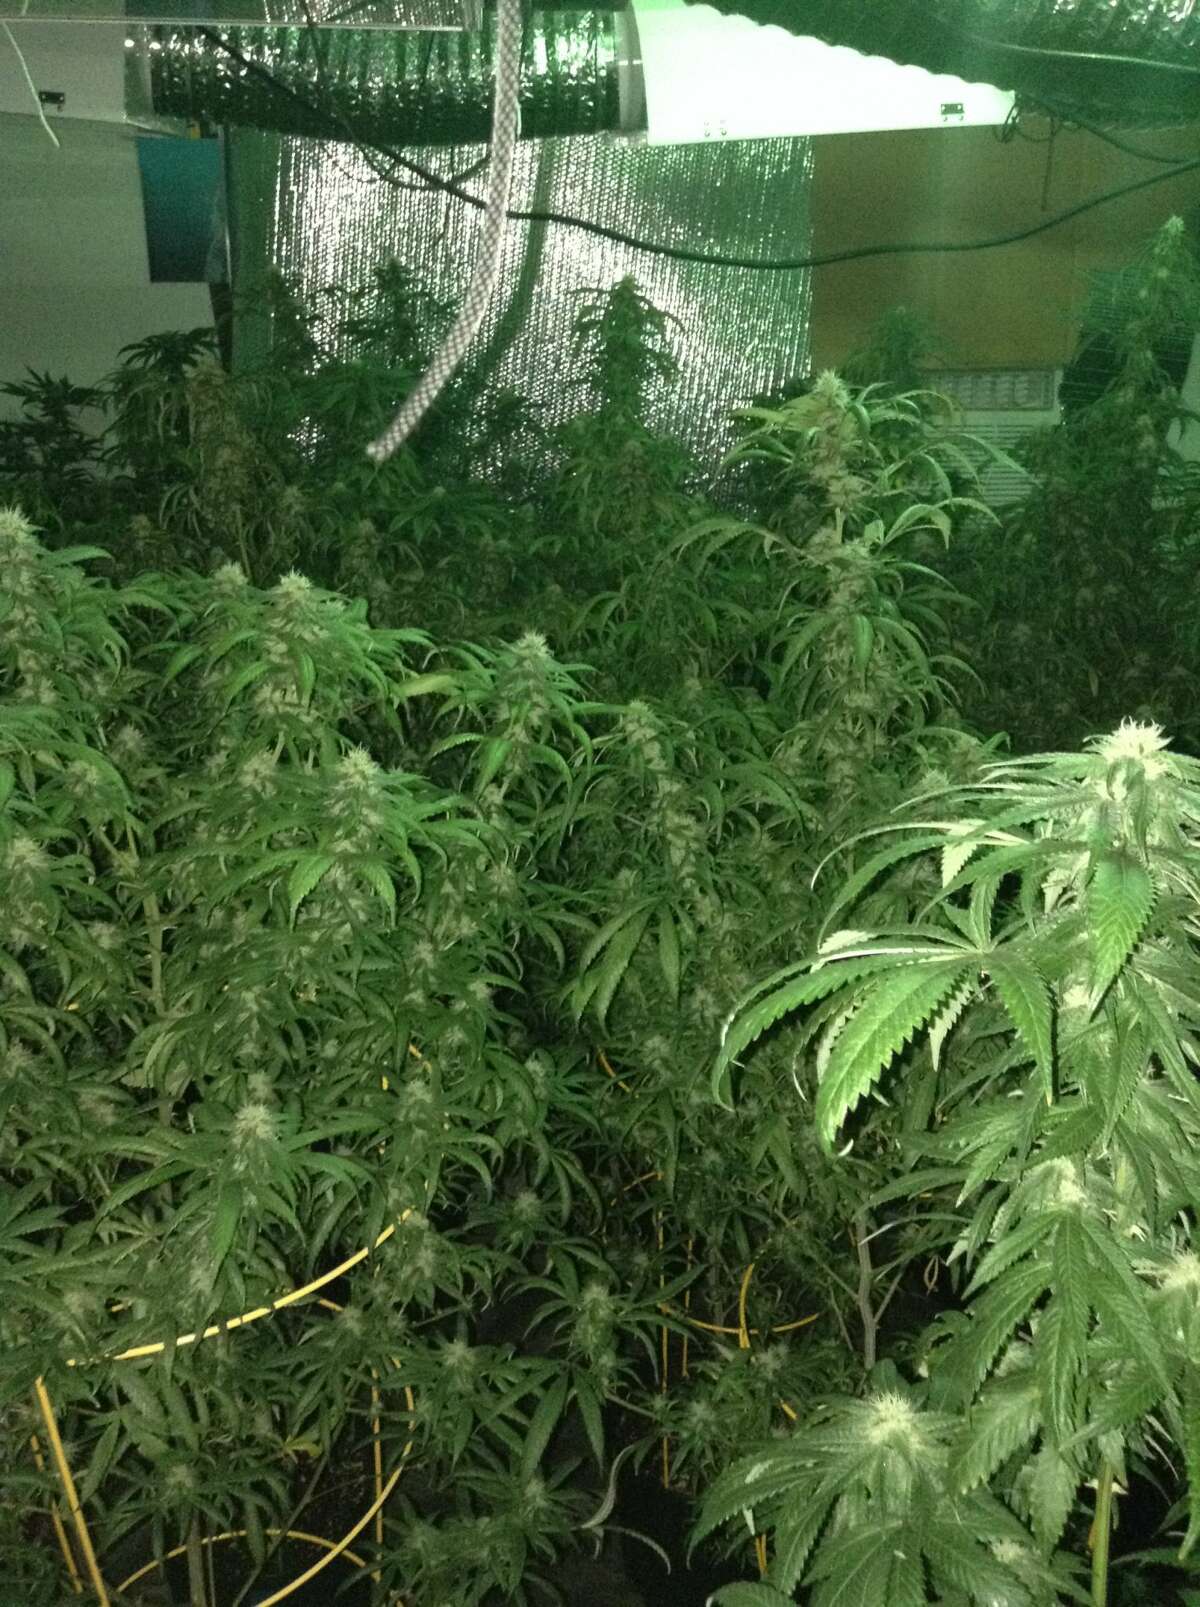 Hundreds of marijuana plants were seized in a drug bust of four homes in Fort Bend and Harris counties on Sept. 28, 2017.